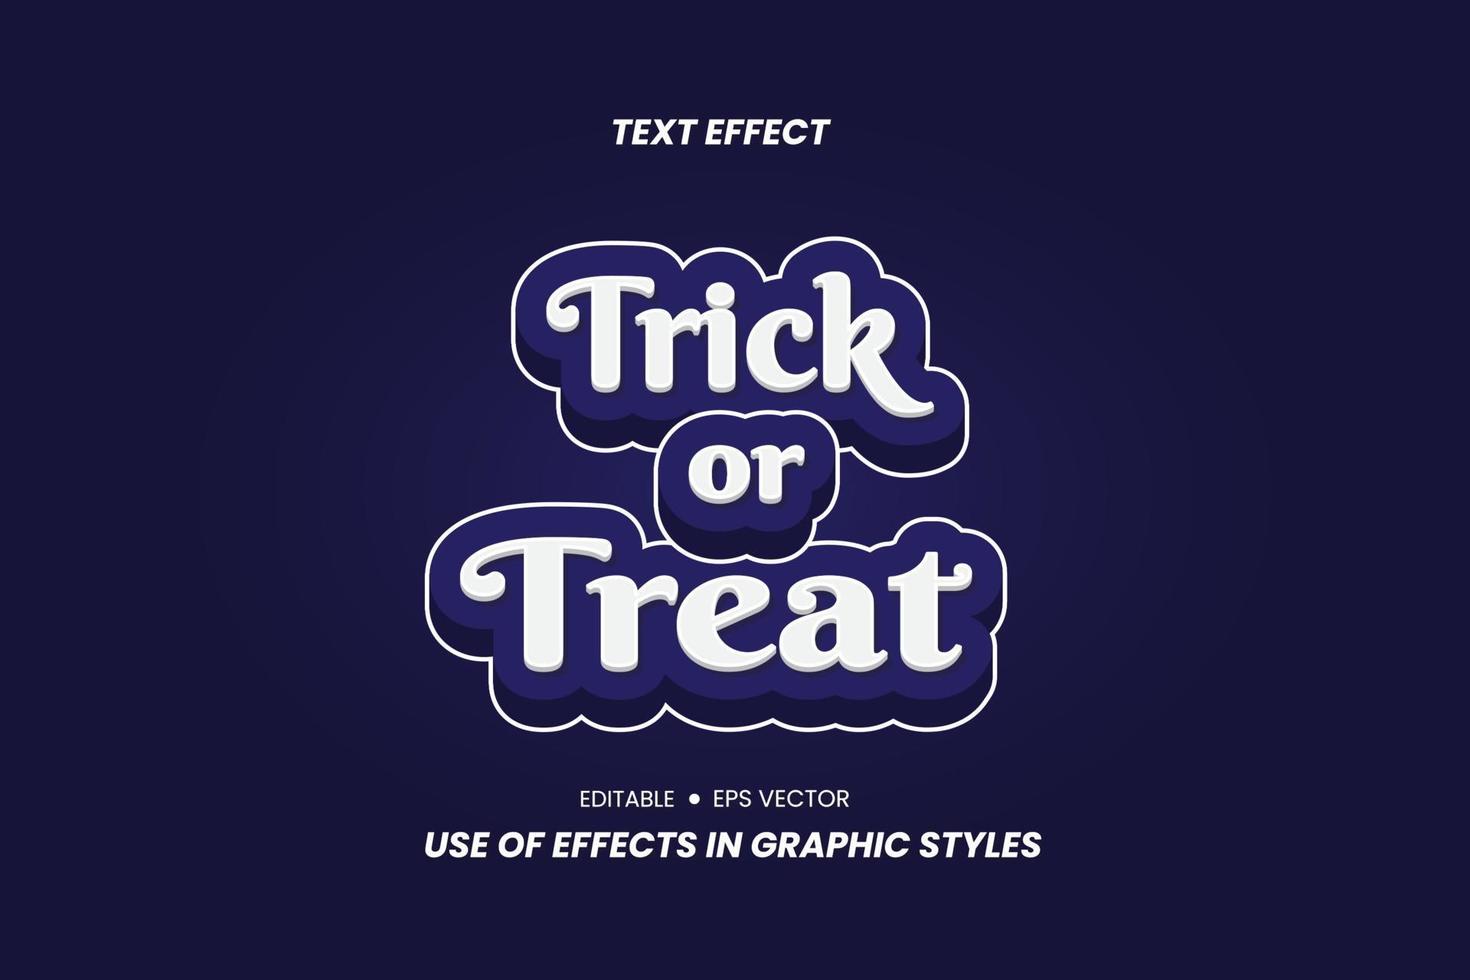 Tricks of Treat Text Effects with 3D letters vector